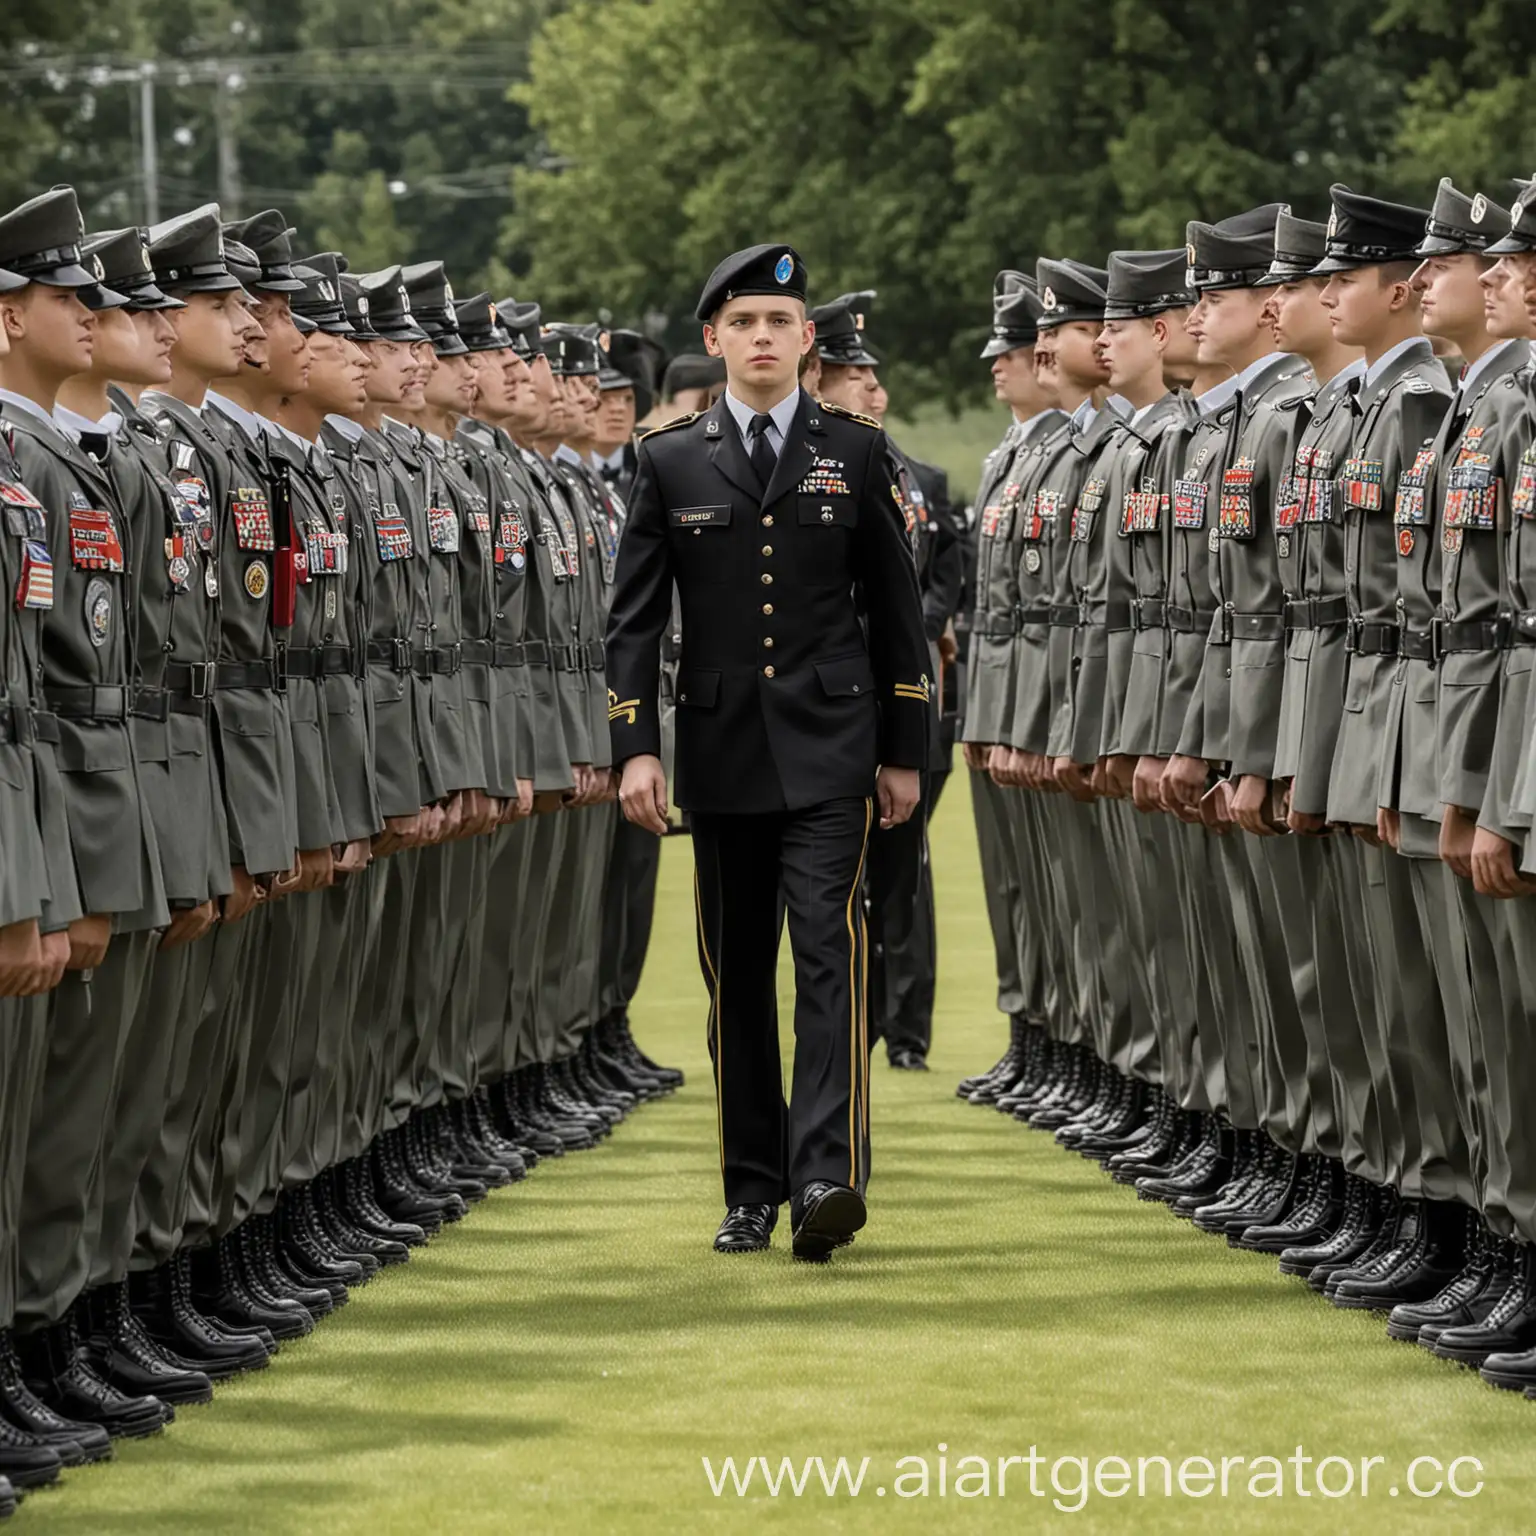 Cadet-Commands-Army-Training-Drill-in-Camouflage-Uniforms